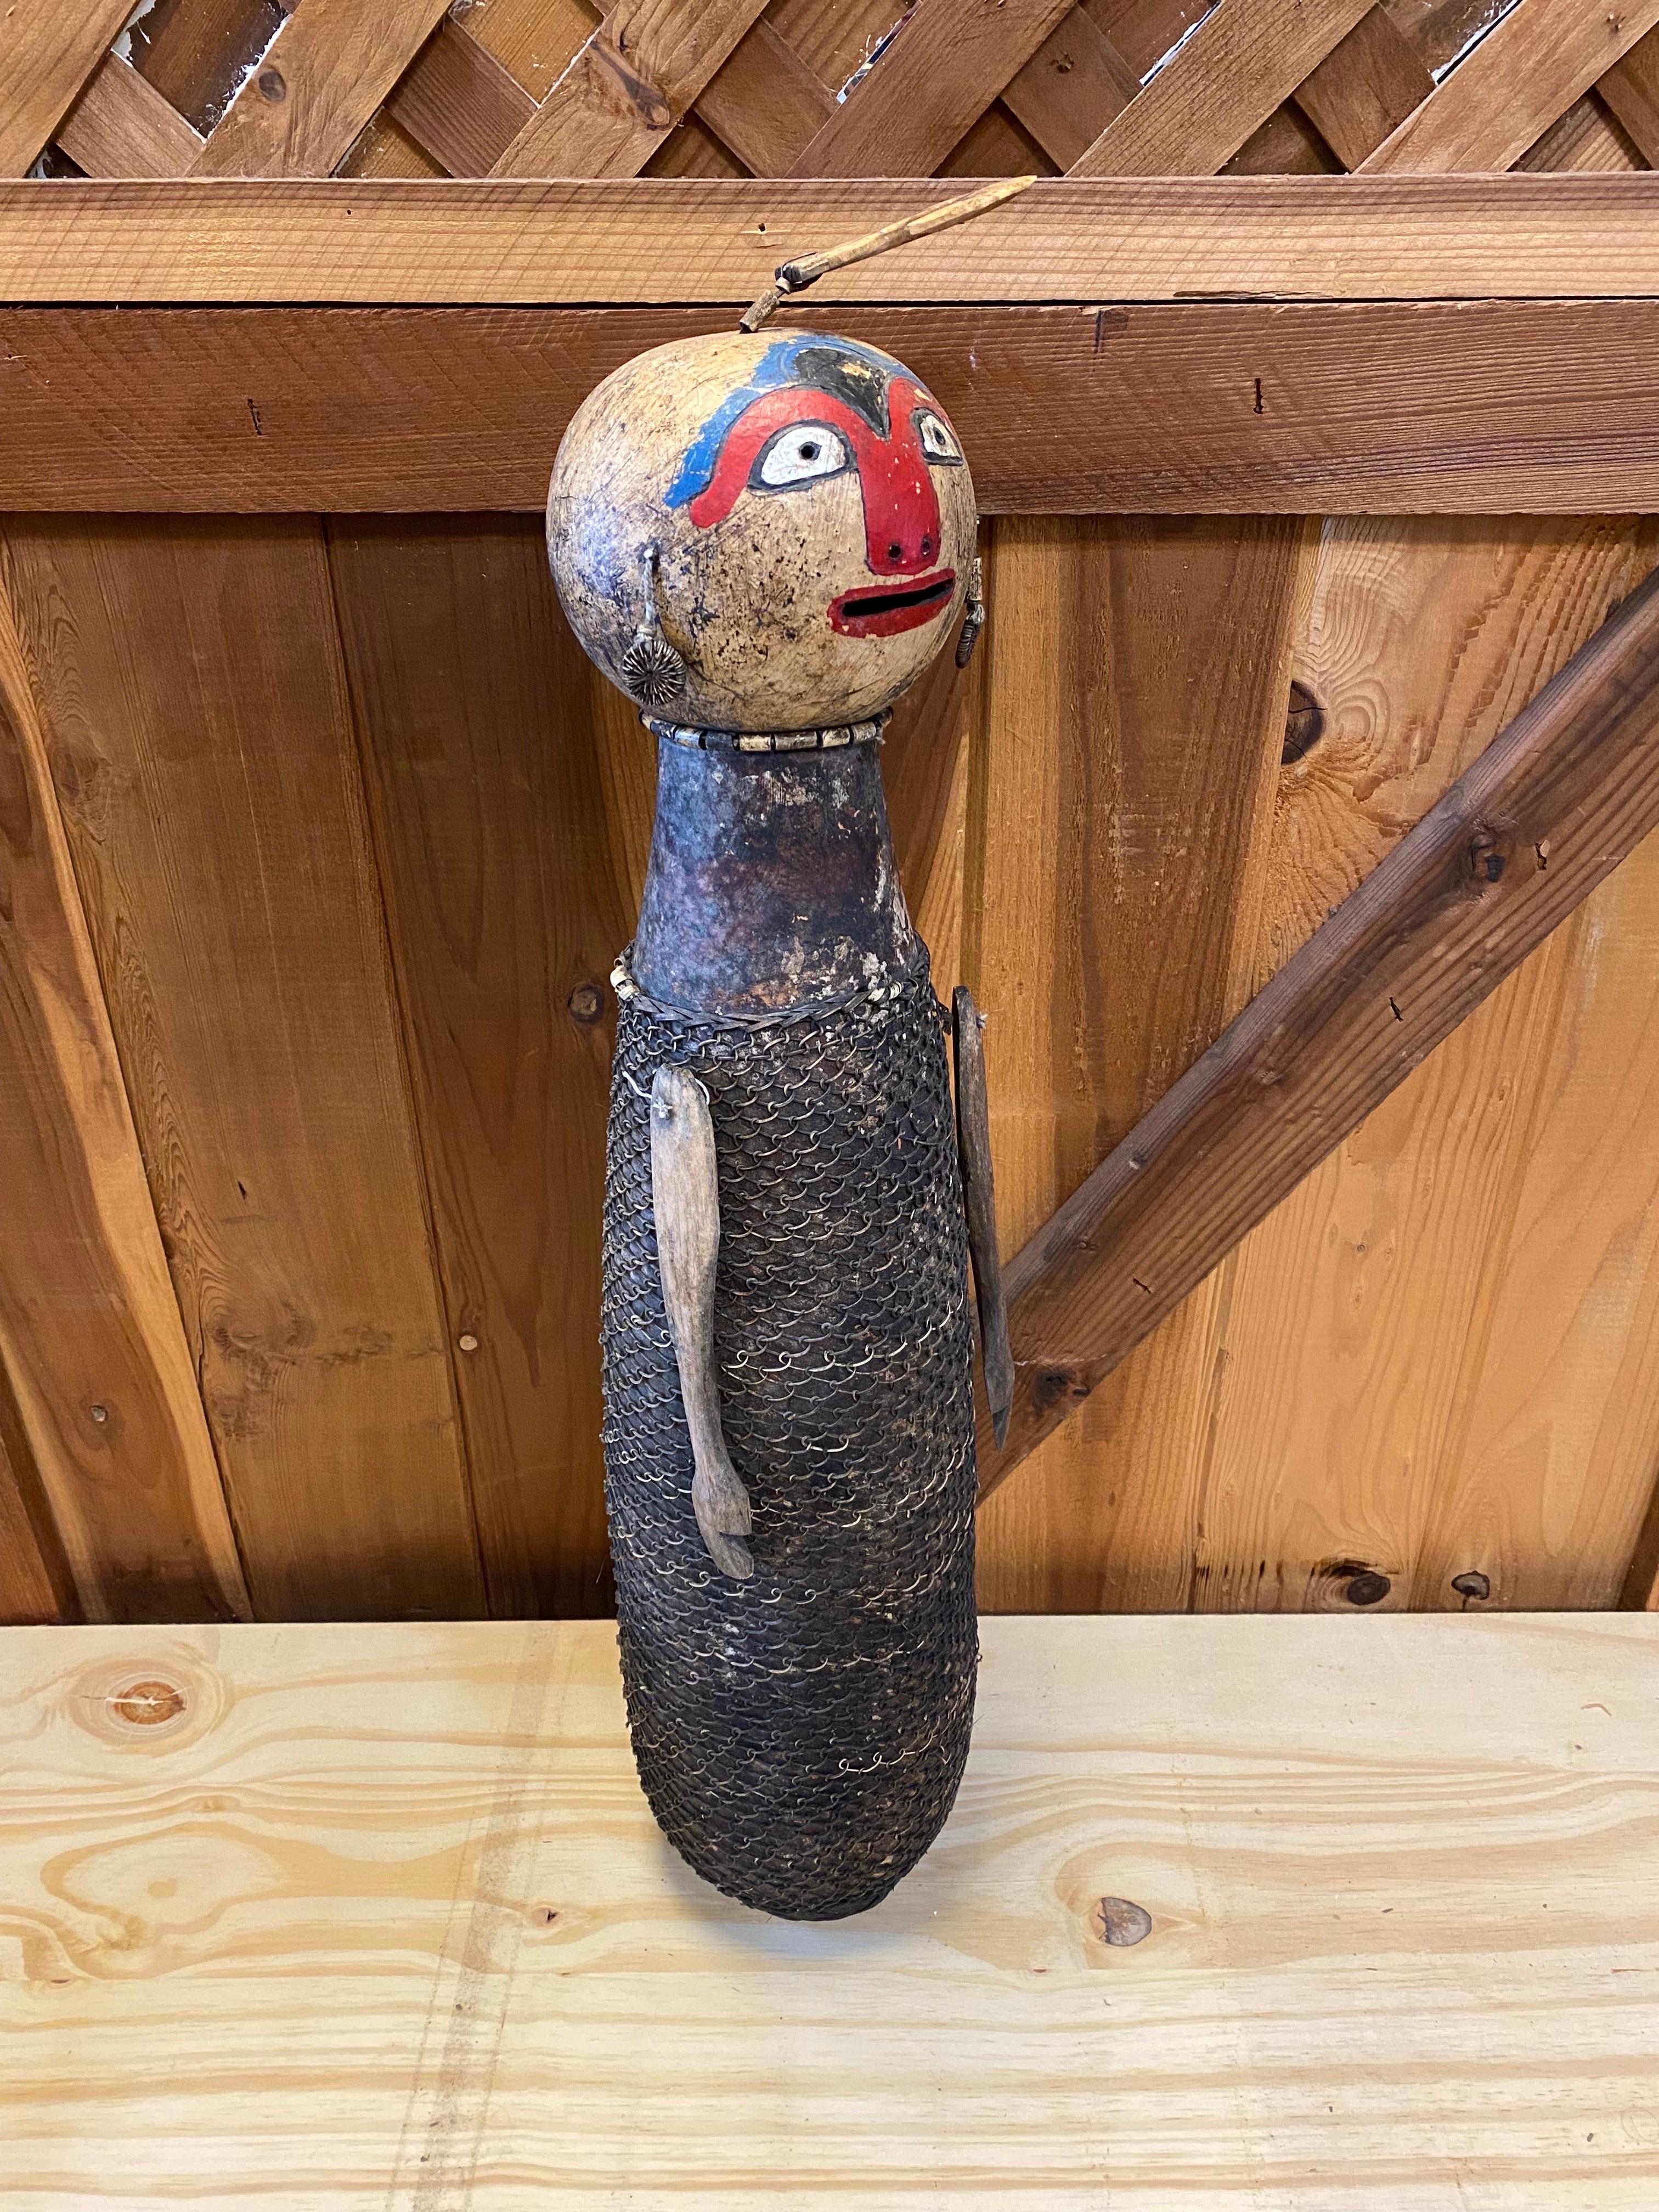 Beautiful vintage African Namji doll made from dried gourd and decorated with a rattan skirt and earrings. This precious African statue or sculpture is finished off with a red, blue and white face paint. On the top there's what looks like a hook and